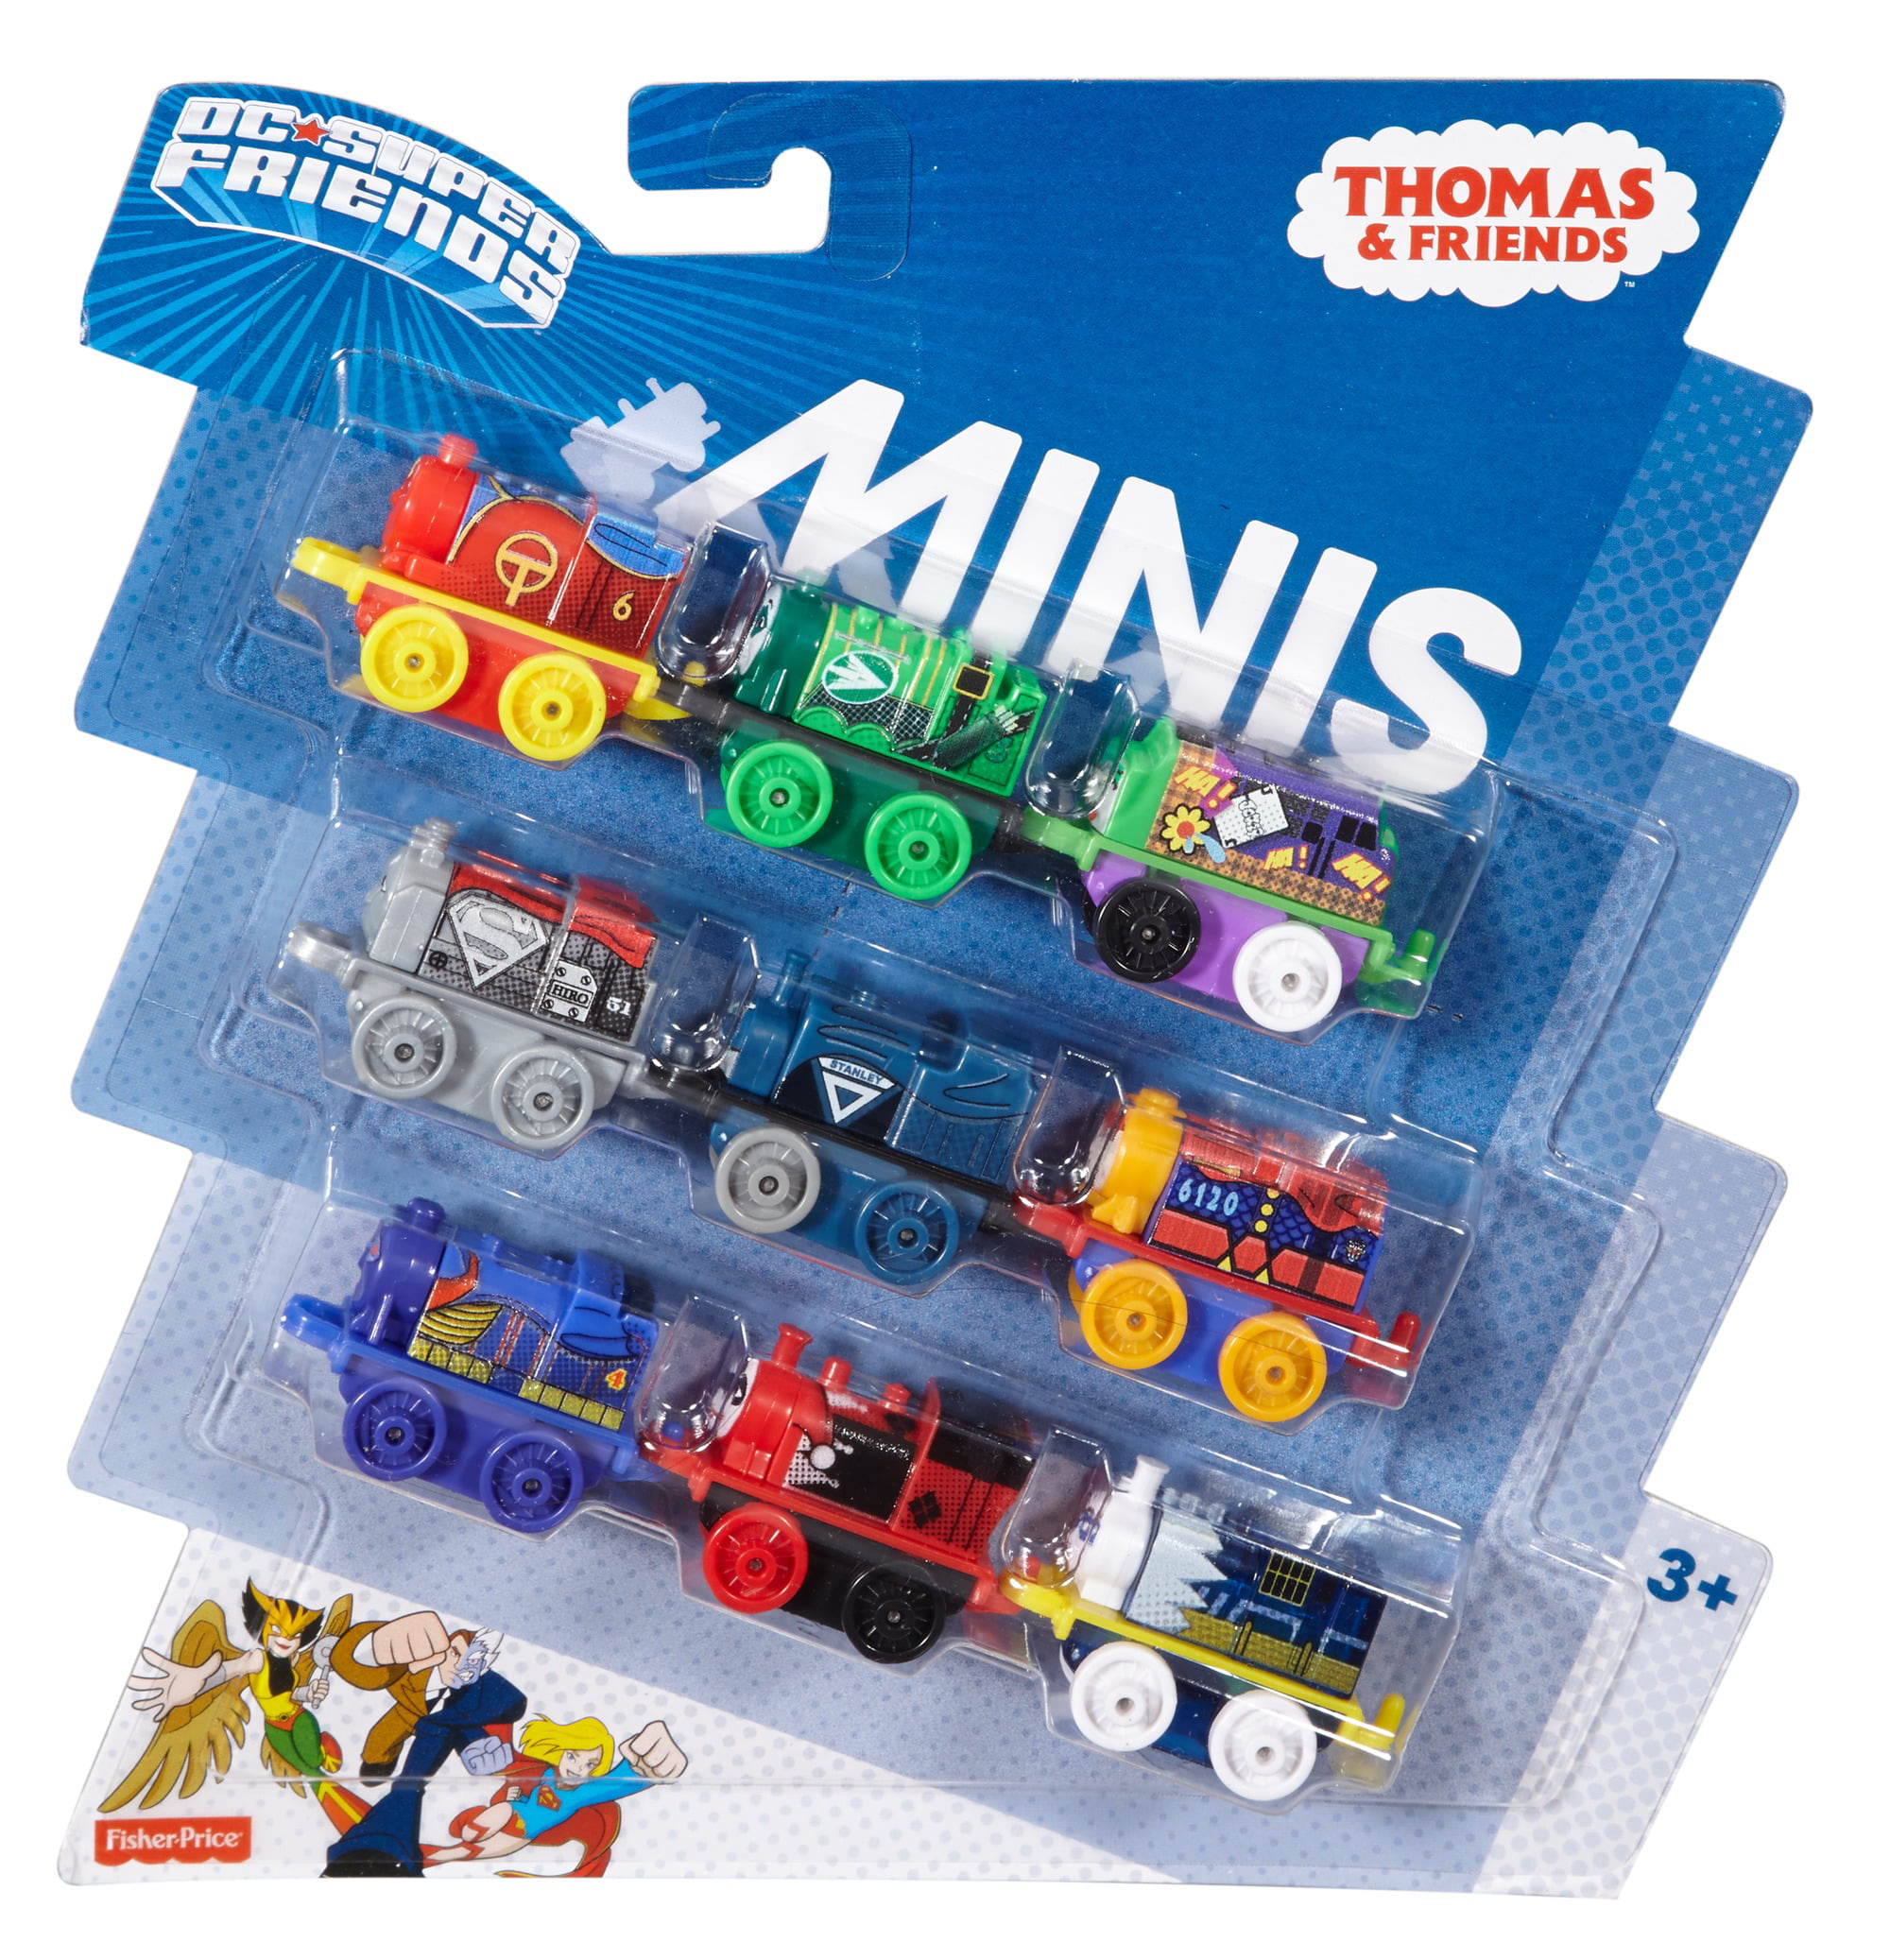 Fisher-Price Thomas & Friends MINIS 9 Pack DC Super Friends Trains Wave 3 